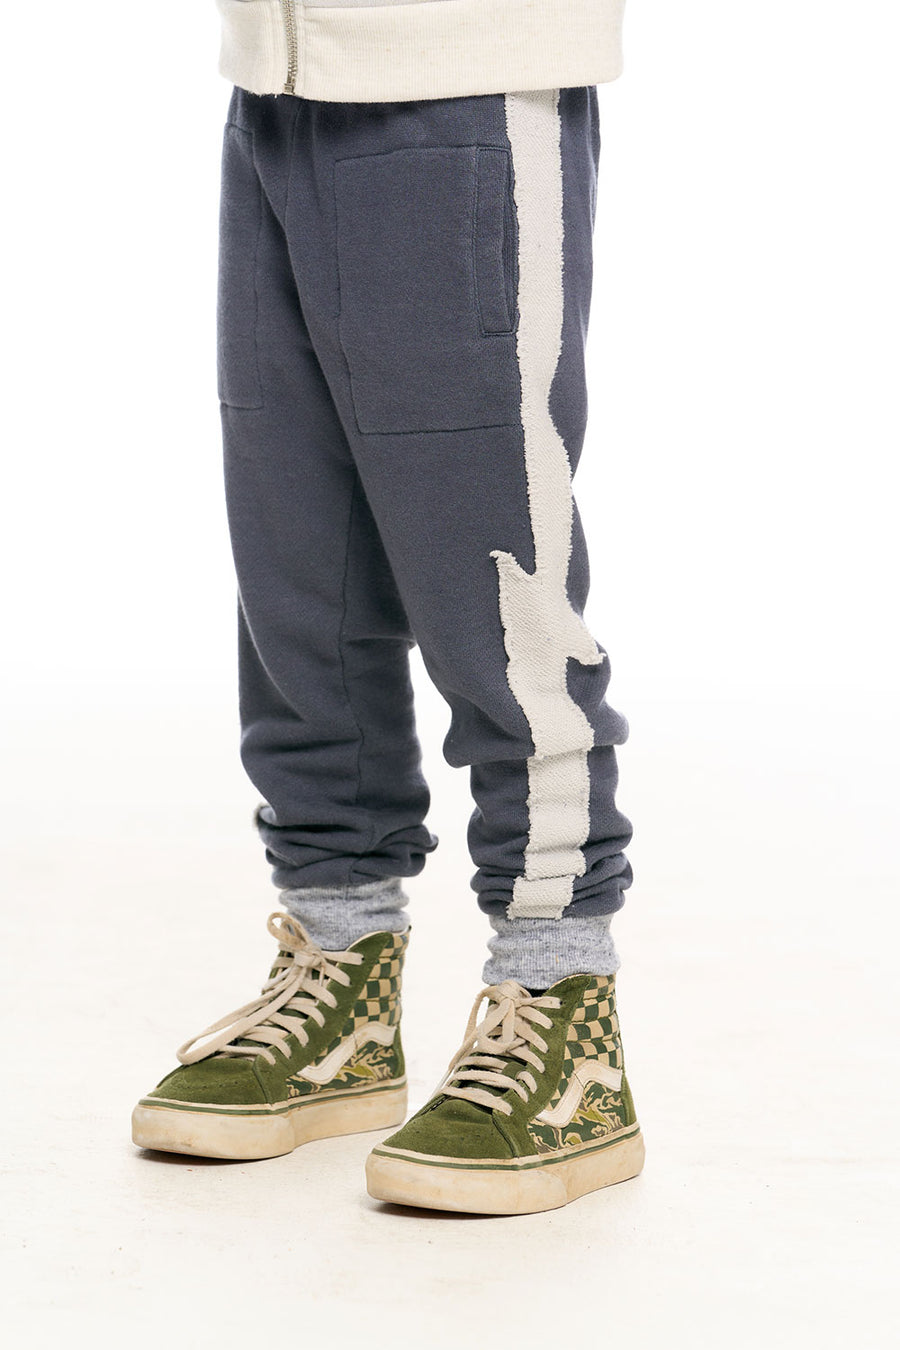 Color Blocked Bolt Joggers BOYS chaserbrand